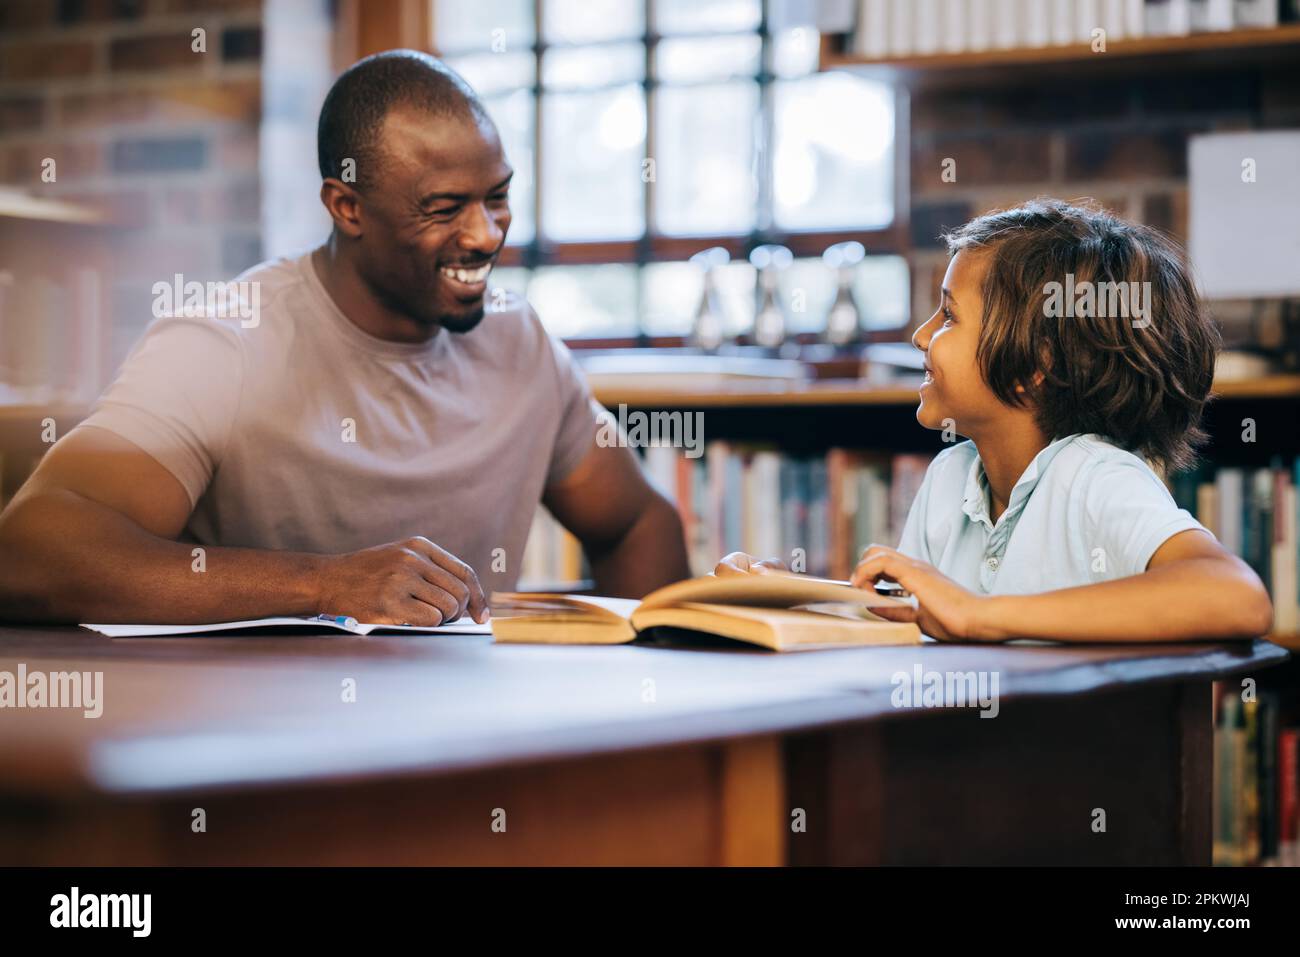 Male elementary school teacher assisting a young boy with school work. Man tutoring a primary school student in a private lesson. Teacher and student Stock Photo